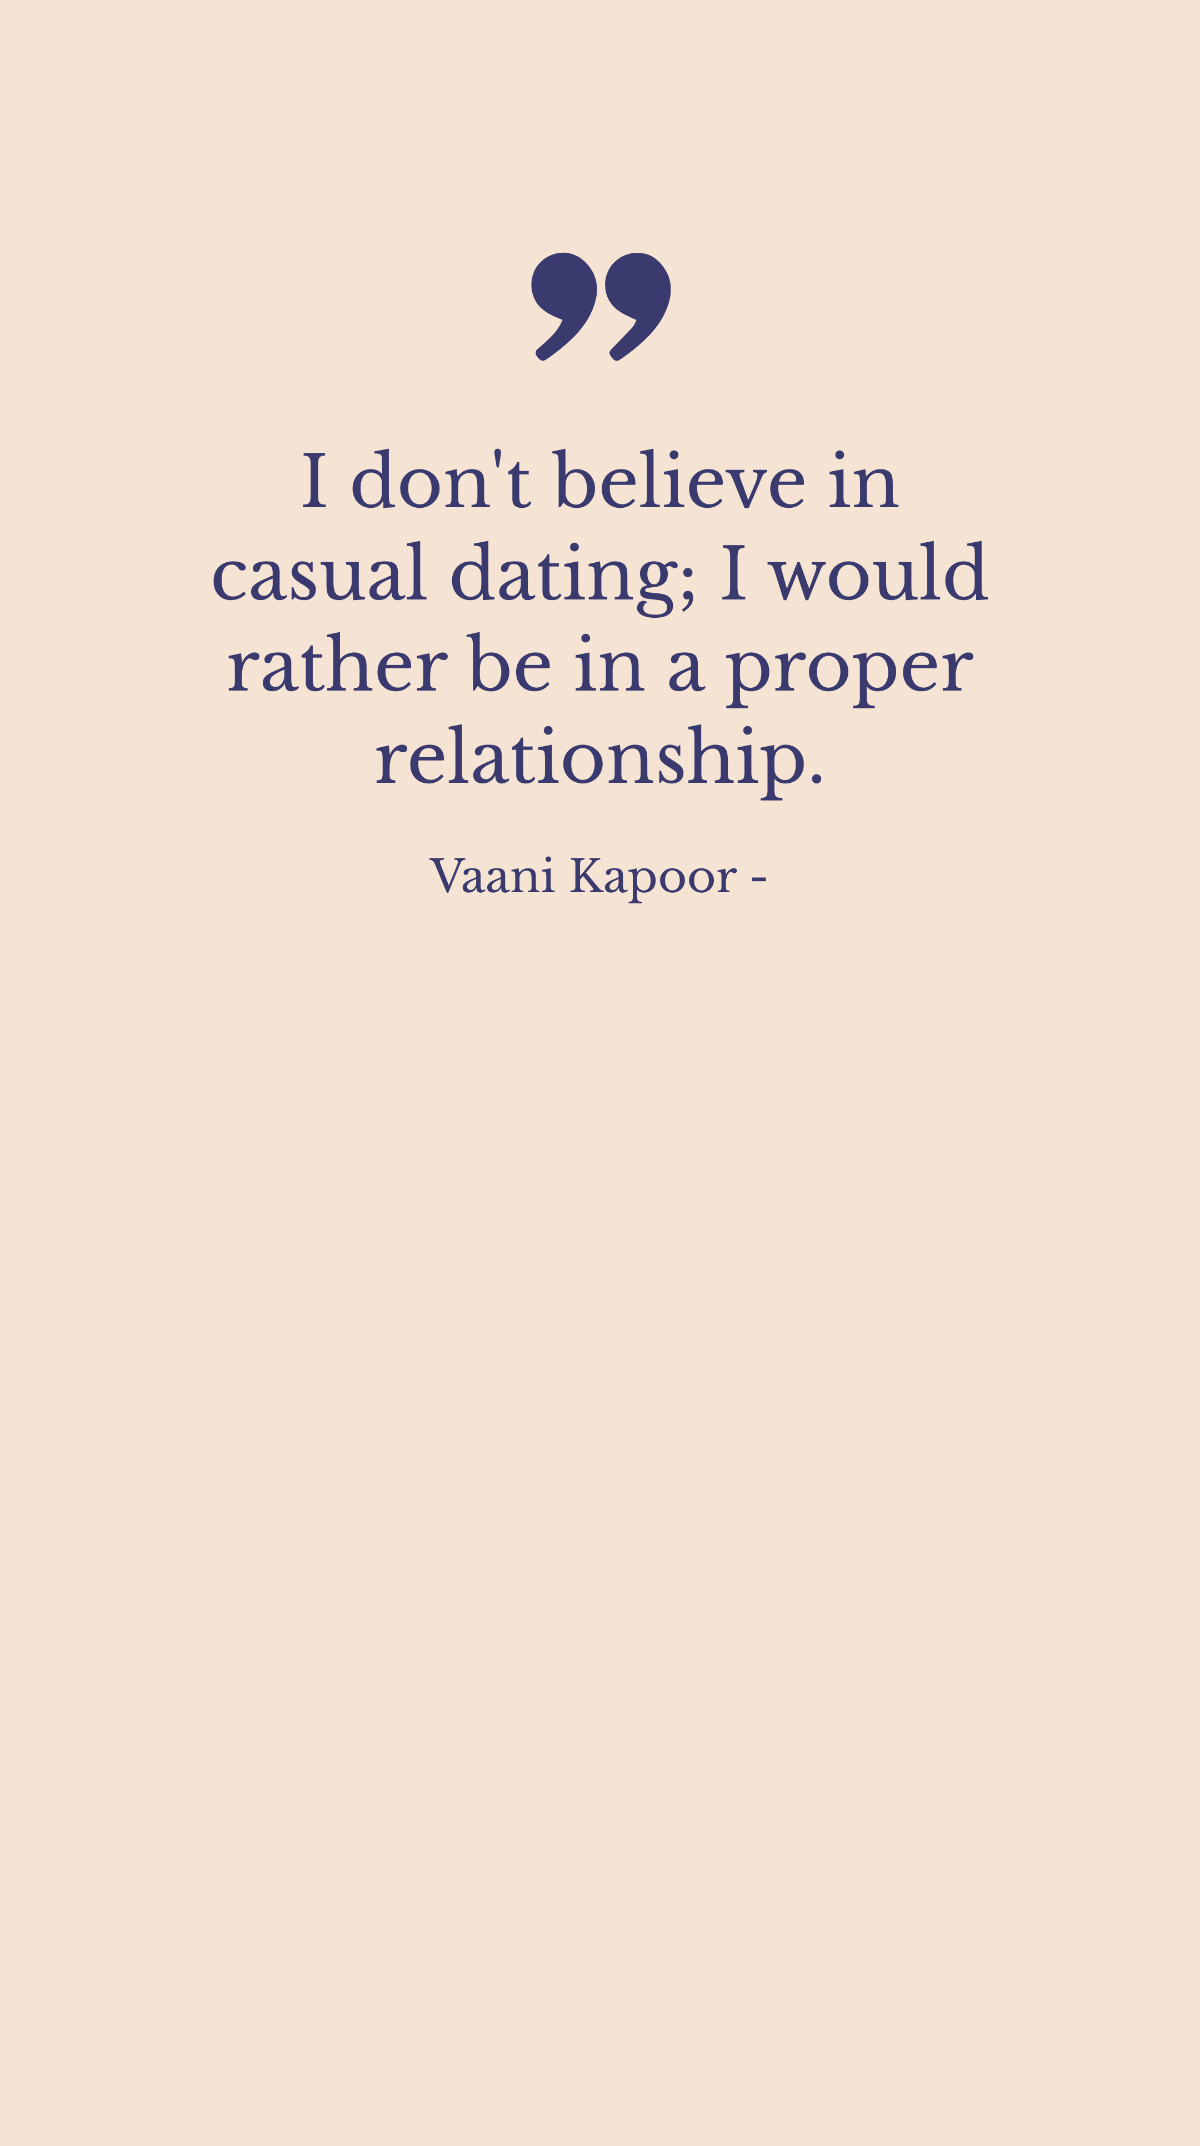 Vaani Kapoor - I don't believe in casual dating; I would rather be in a proper relationship. Template